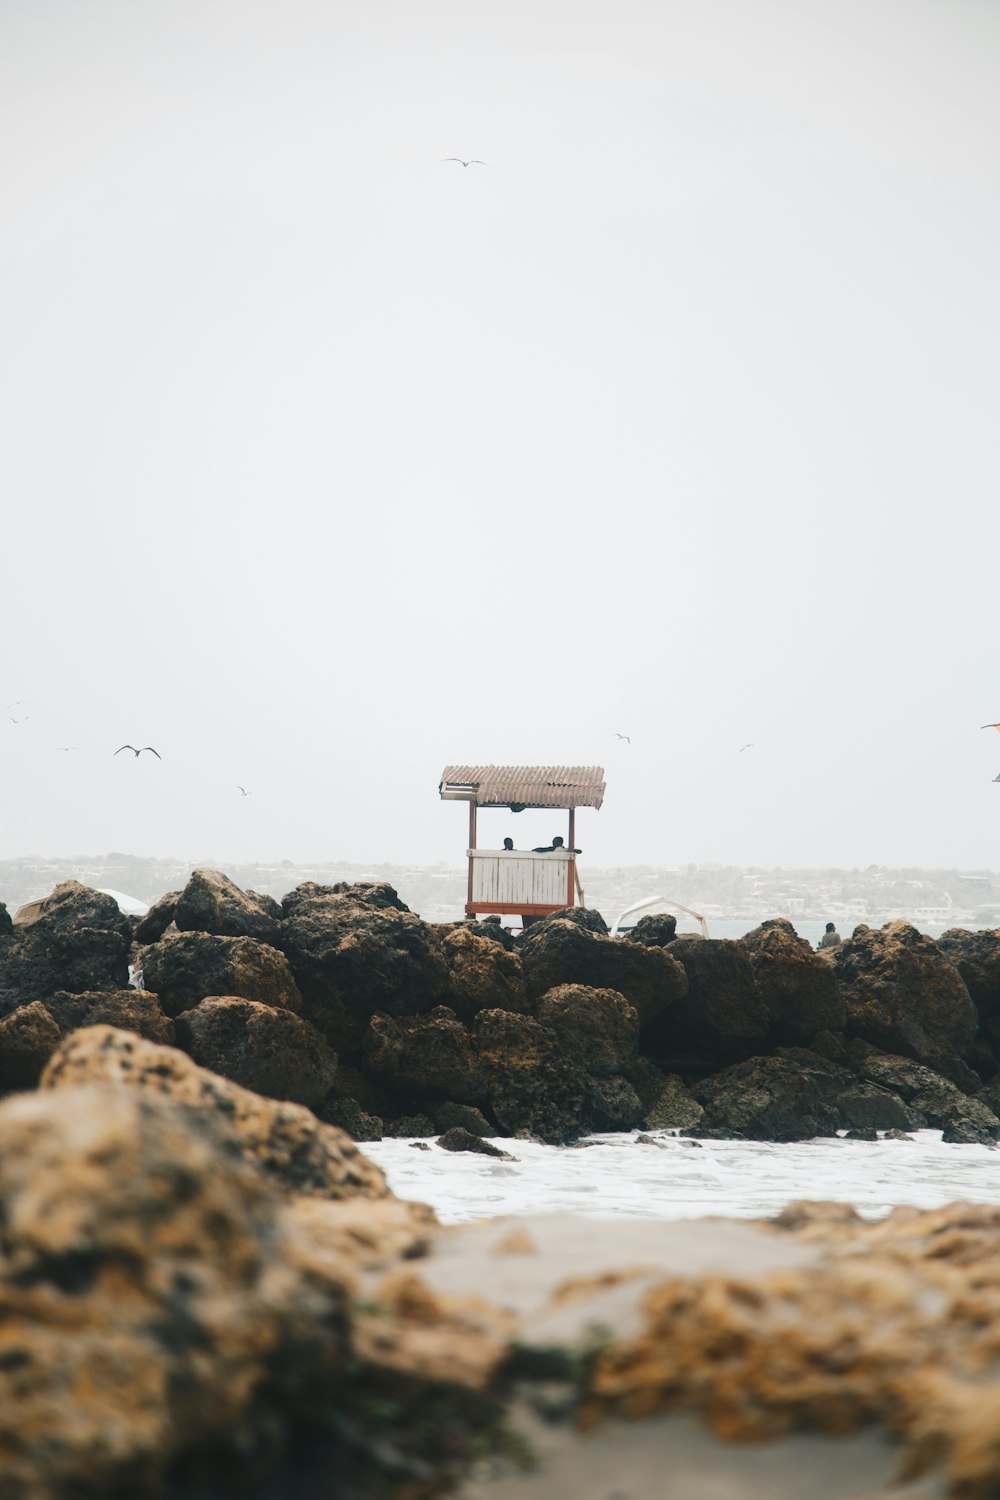 brown wooden lifeguard house on rocky shore during daytime